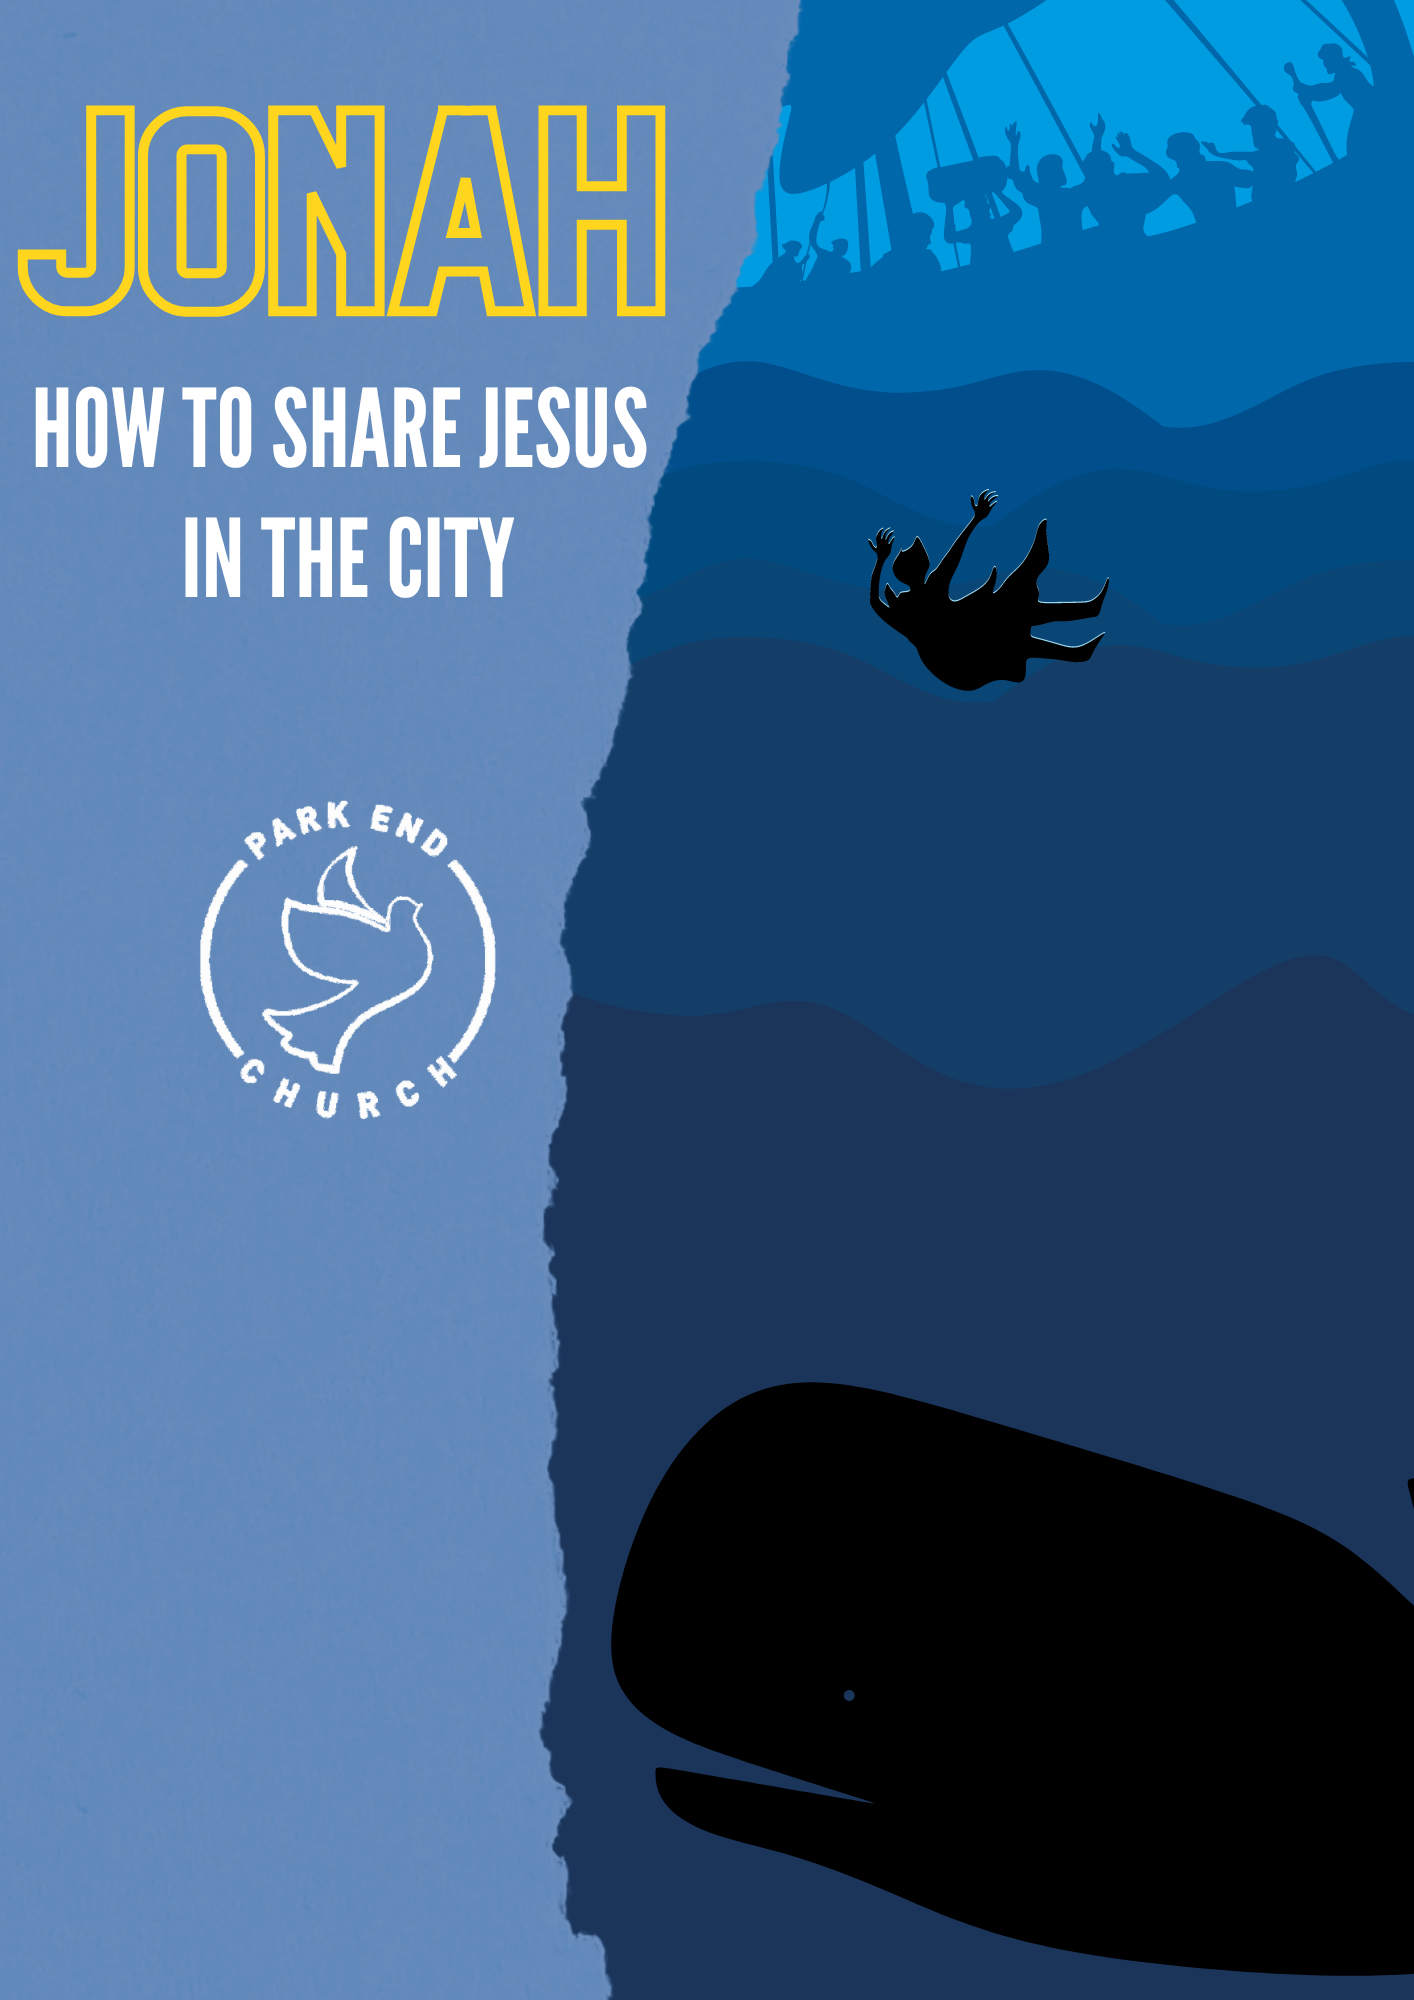 How to share Jesus in the city